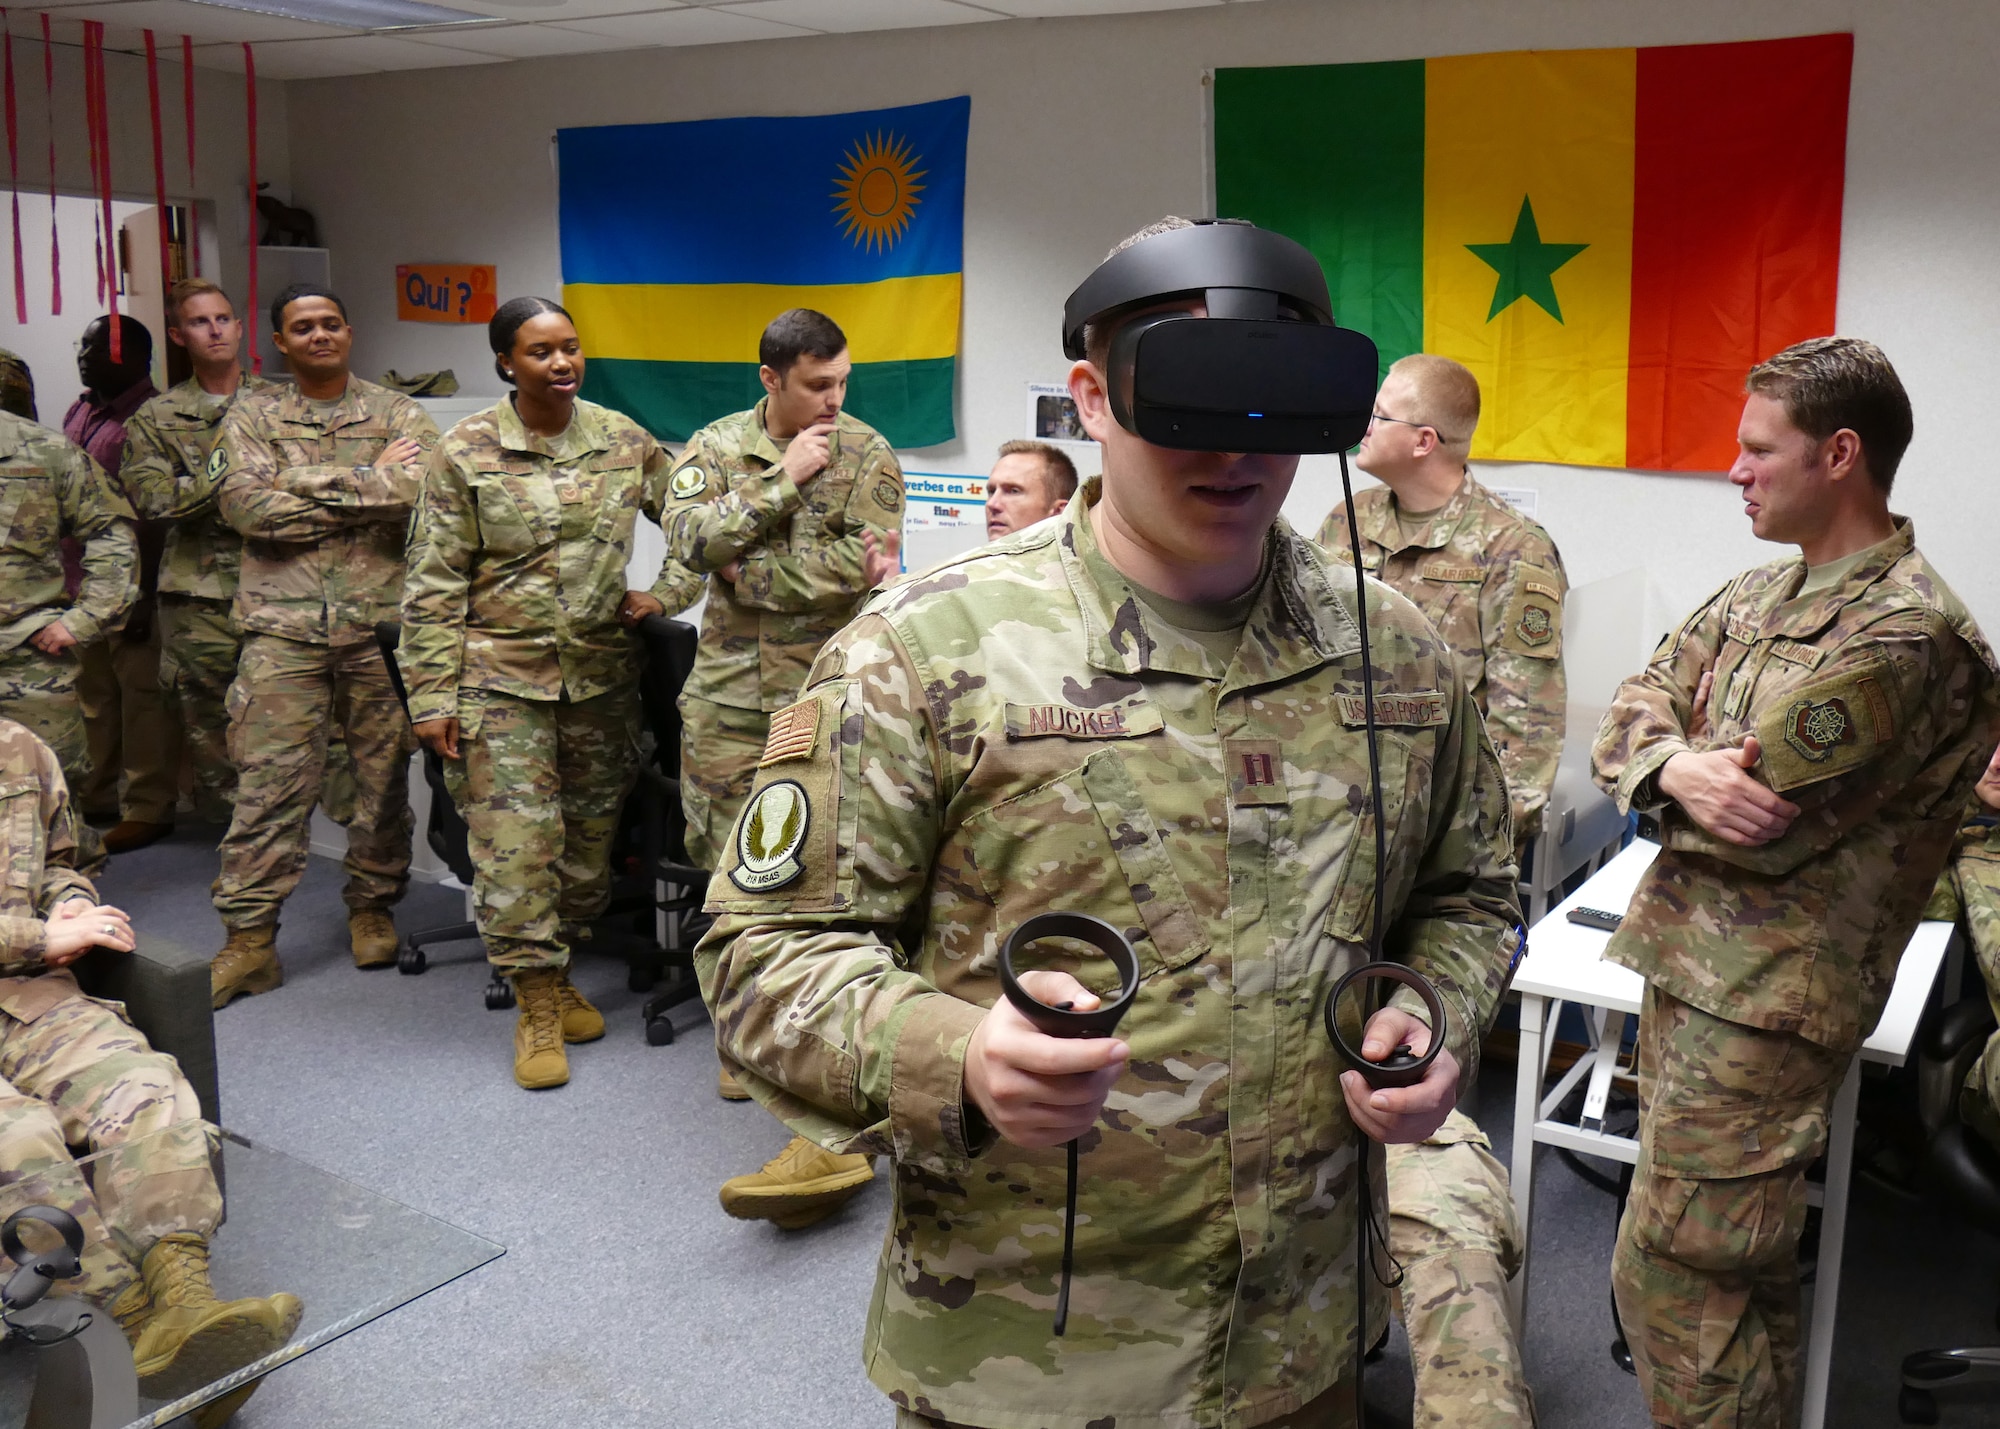 U.S. Air Force Capt. Reilly Nuckel, 818th Mobility Support Advisory Squadron flight commander, tests the new virtual reality French language program at the Language Learning Center at Joint Base McGuire-Dix-Lakehurst, New Jersey, Sept. 13, 2019. The LLC helps 818th MSAS Airmen maintain a French language proficiency as part of their mission to help train, advise and assist military partners in Africa. (Courtesy photo)